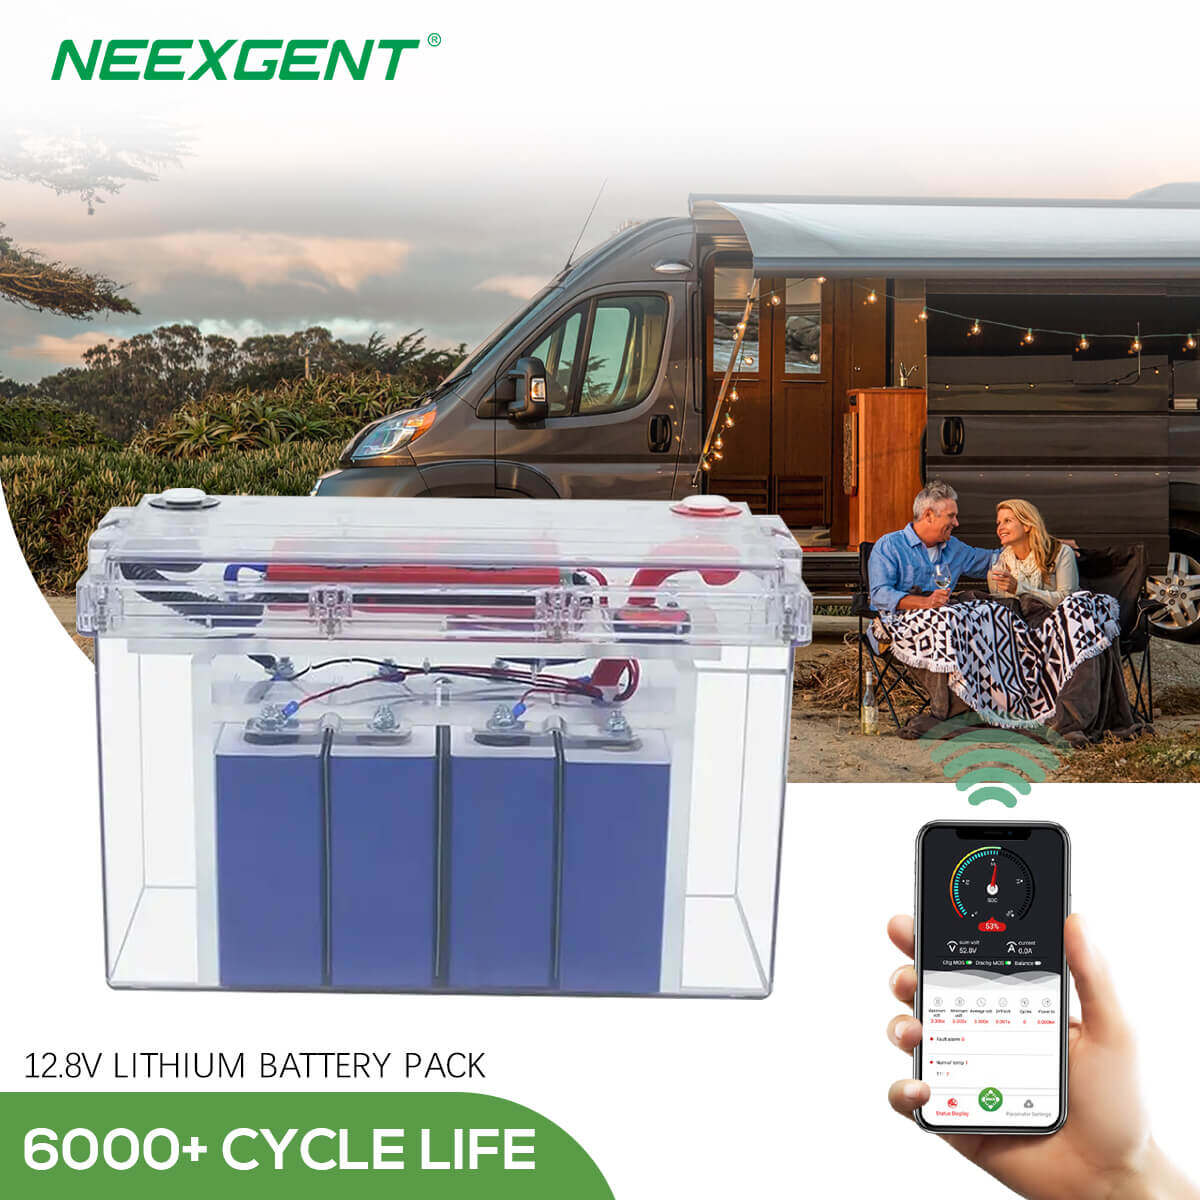 Neexgent Deep Cycle Solar Storage 12.8V 100ah LiFePO4 Lithium Battery Pack for Home Power Back up Supply